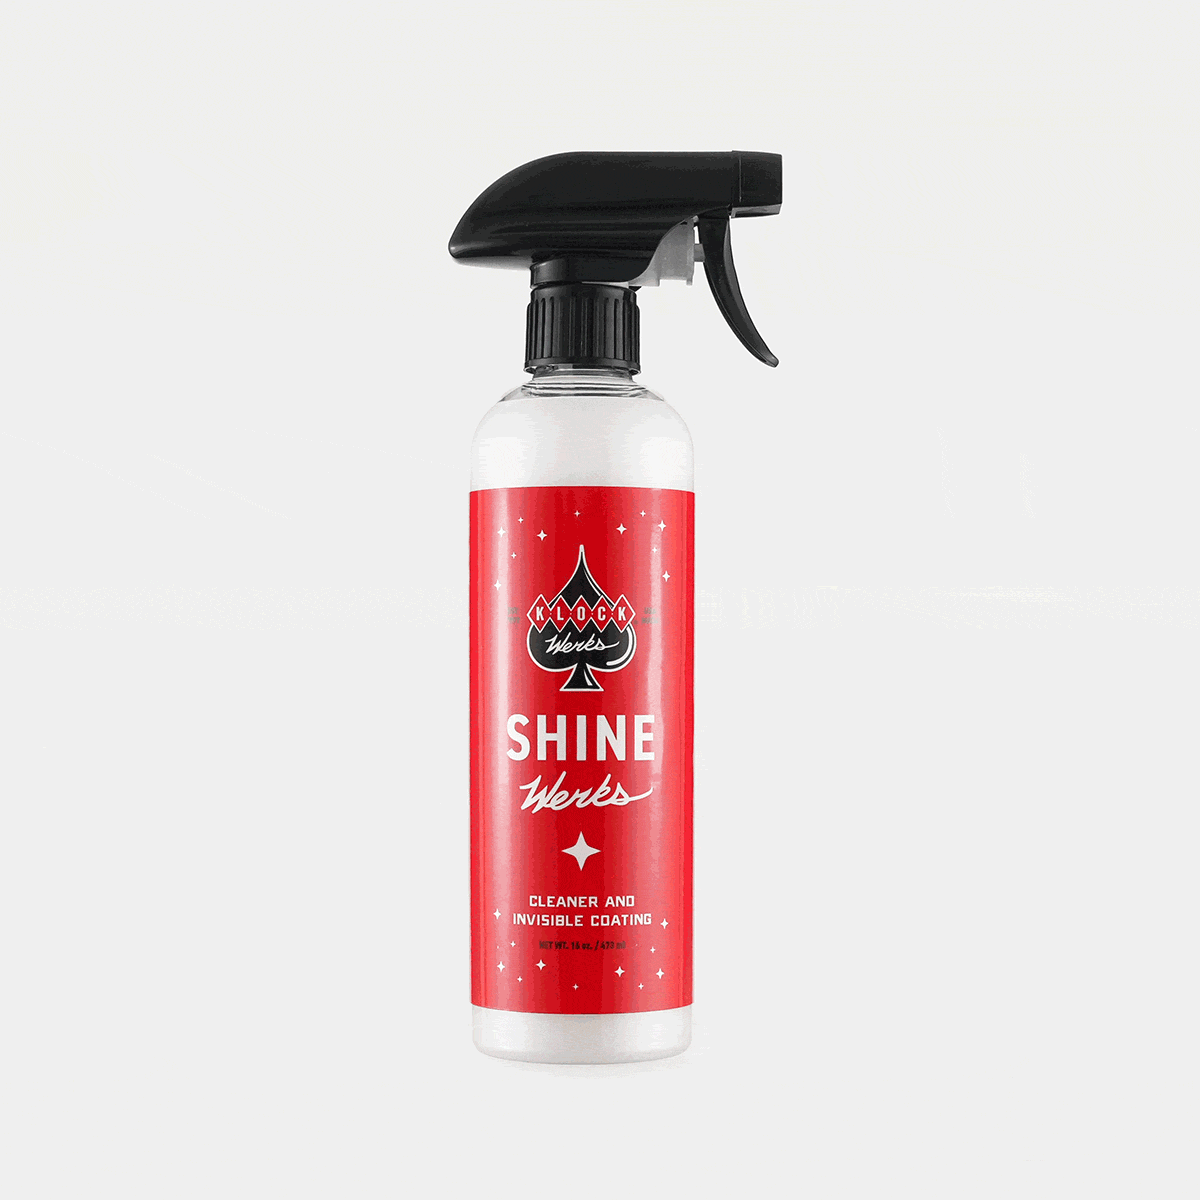 16 oz Shine Werks cleaning and polishing product bottle that is rotating(16 oz. Shine Werks)